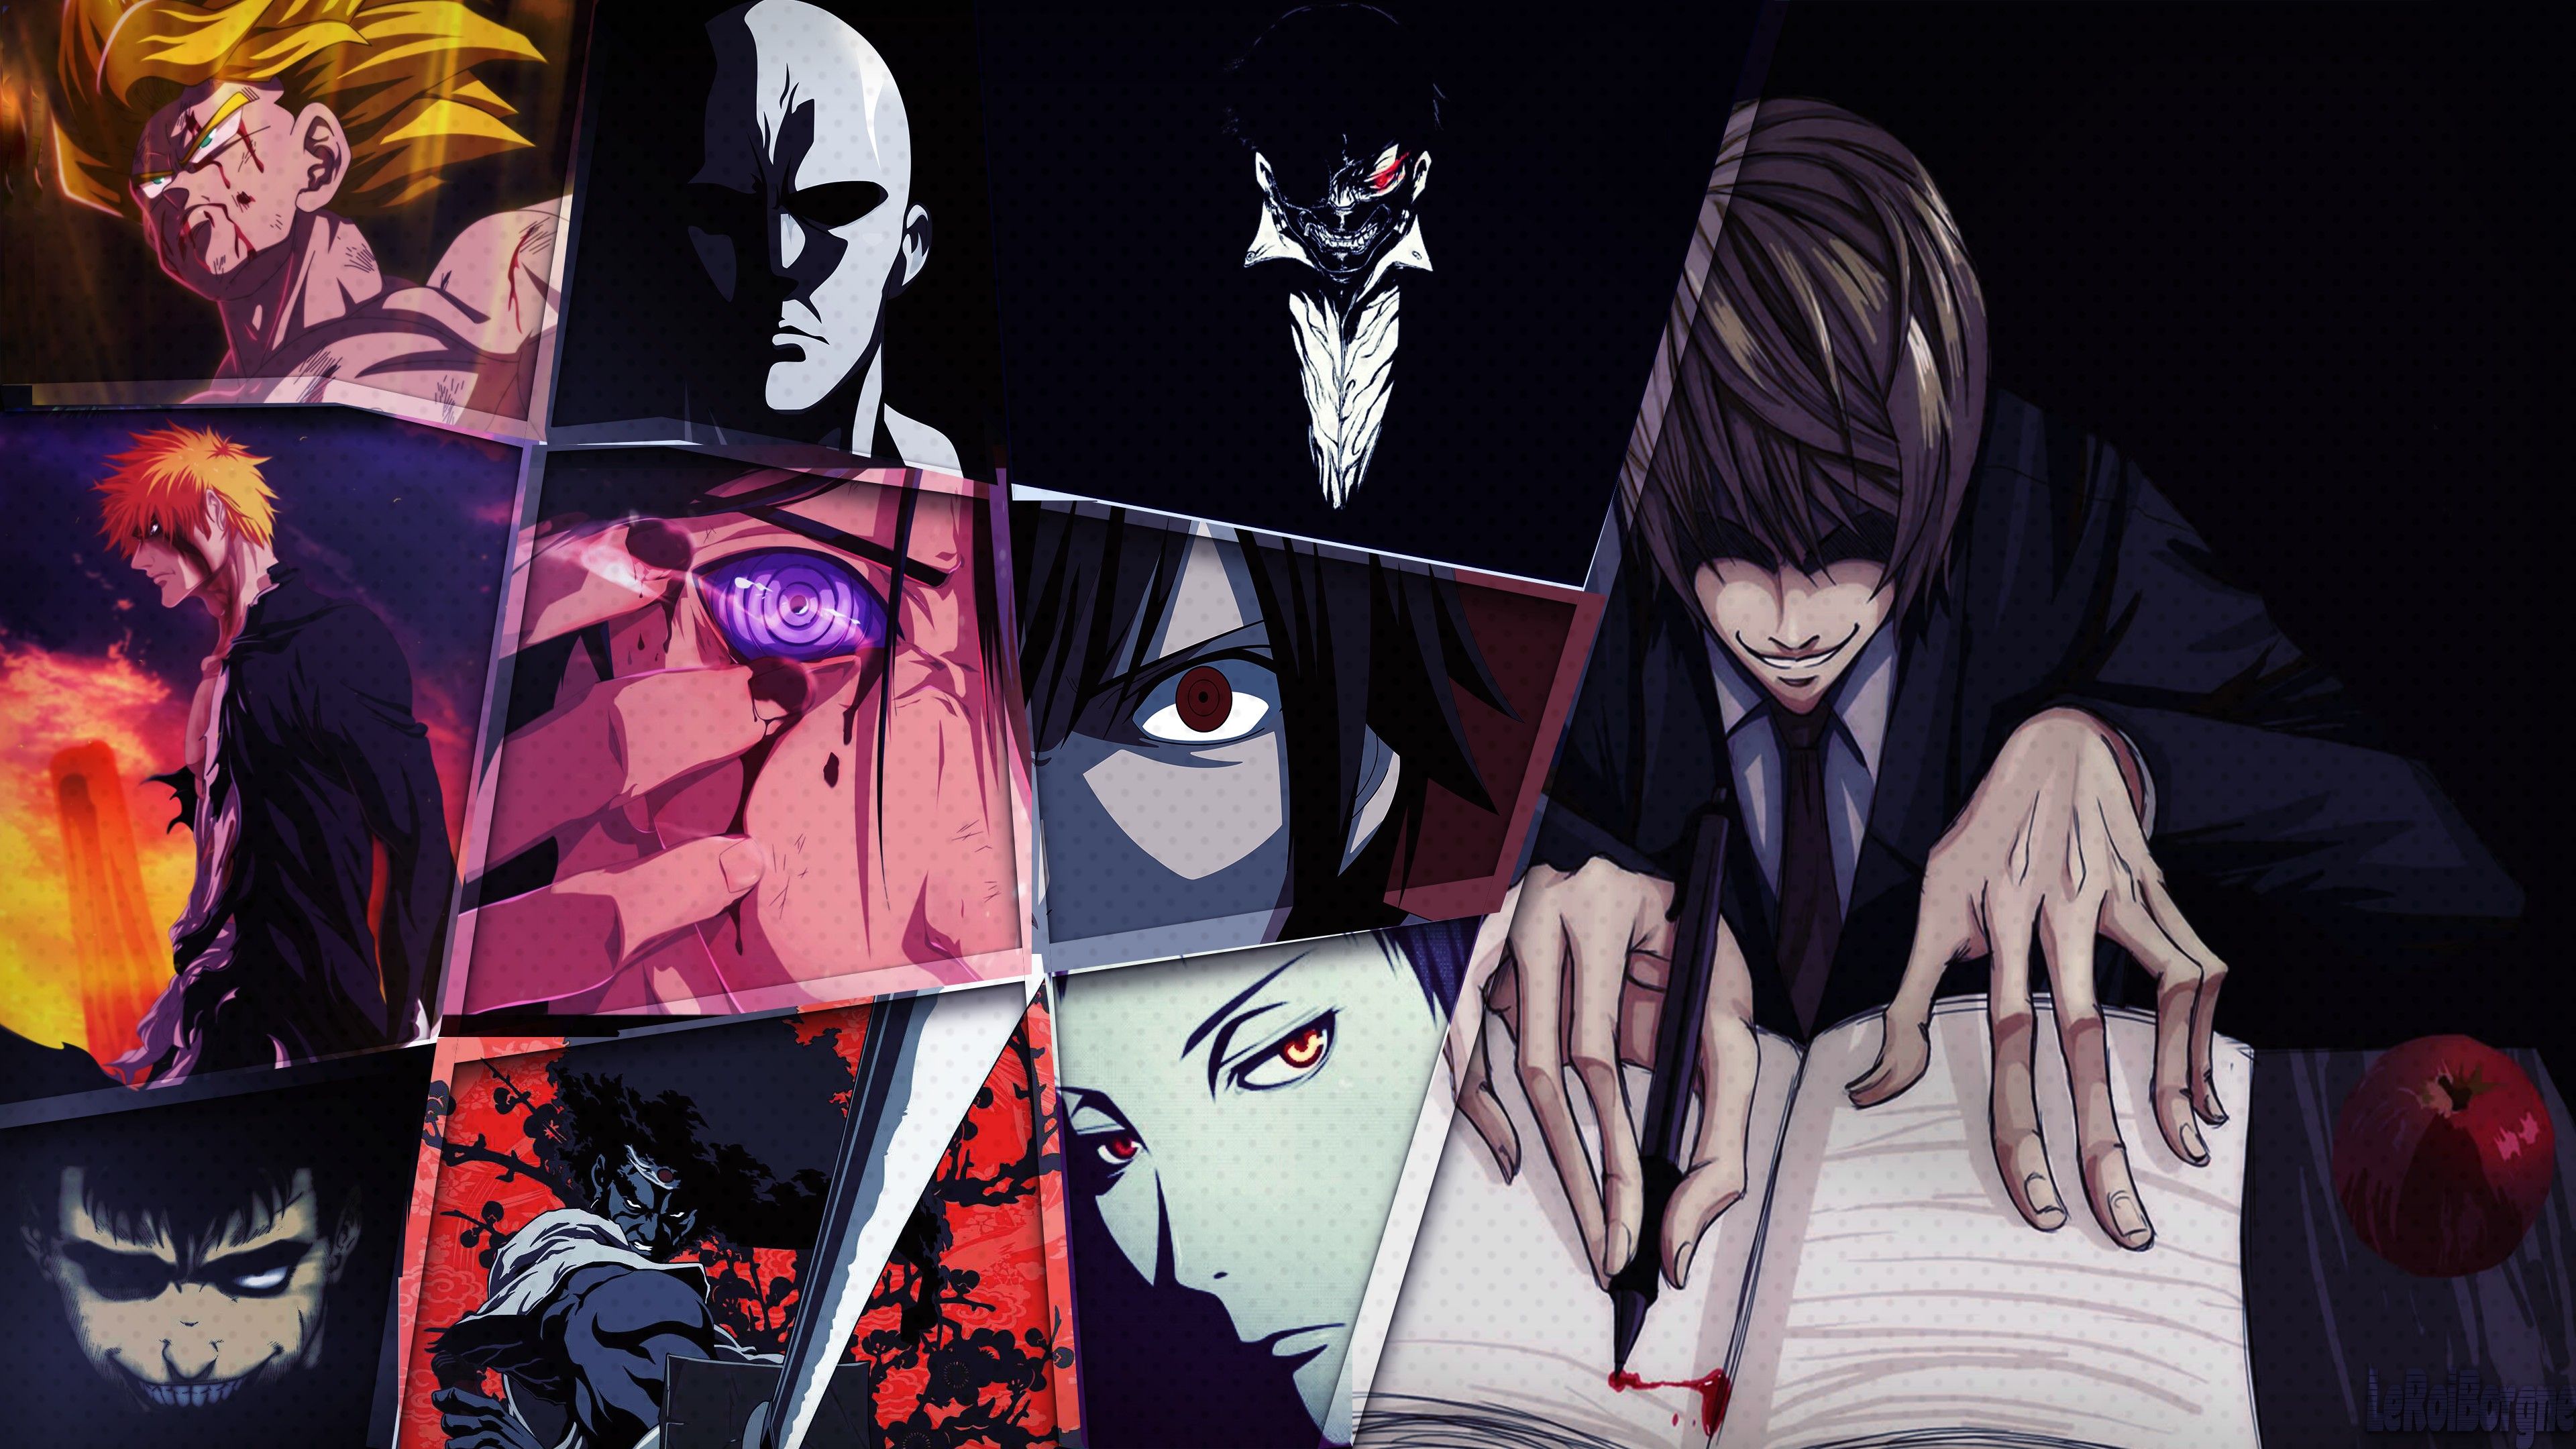 HD desktop wallpaper Anime Collage Crossover download free picture  1479505